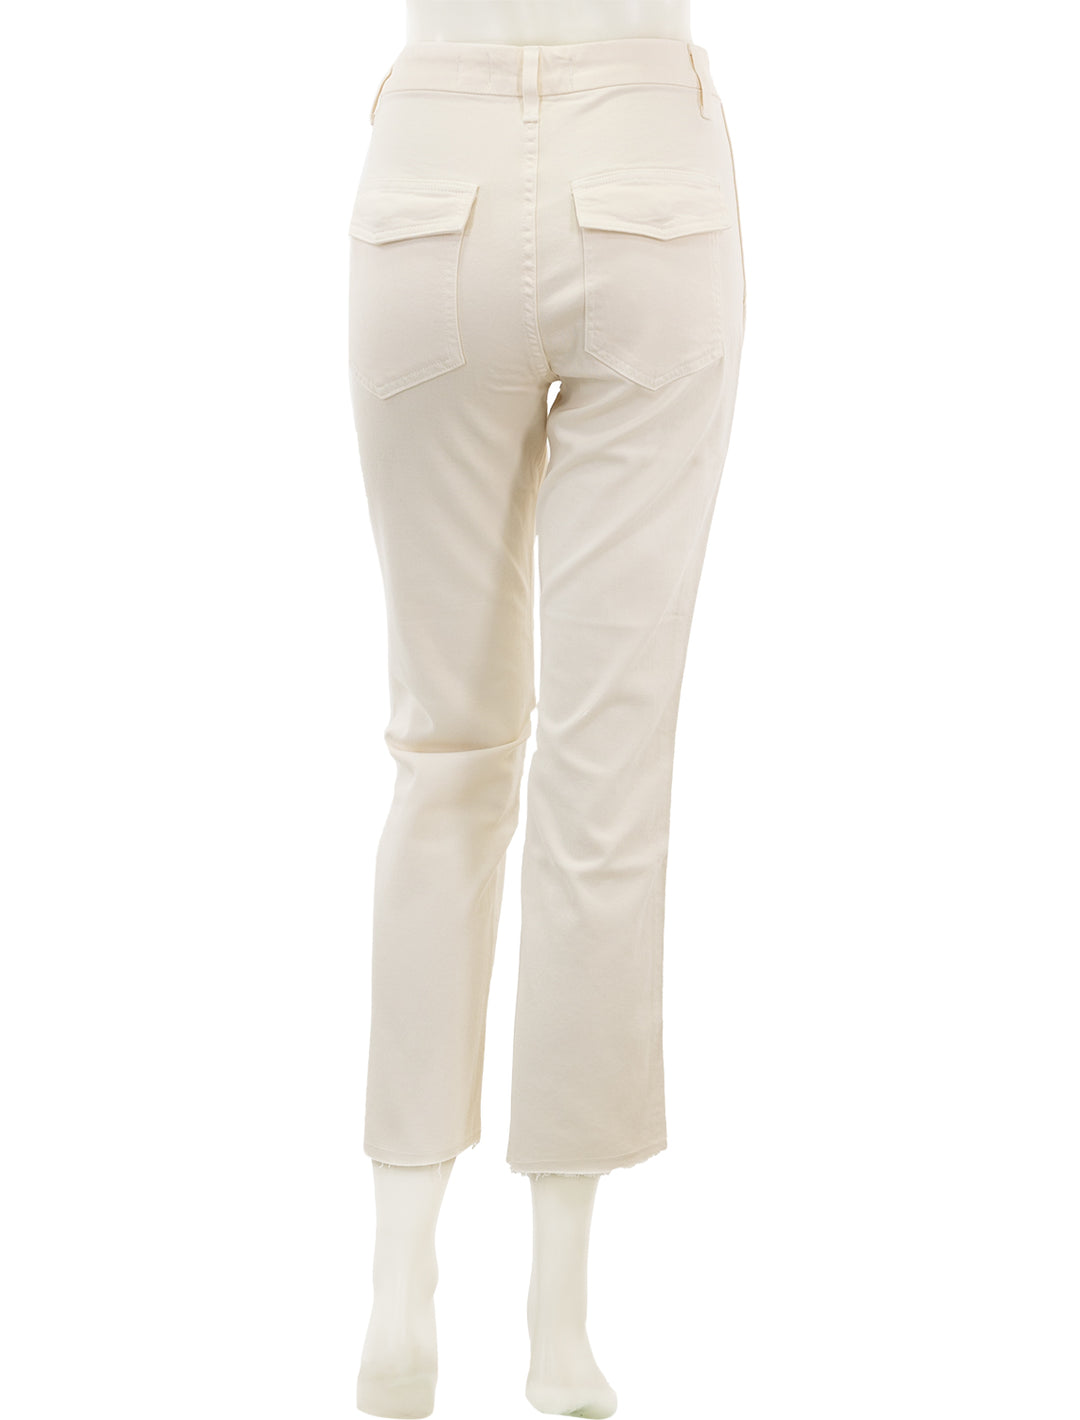 Back view of AMO's easy army trousers in bone.